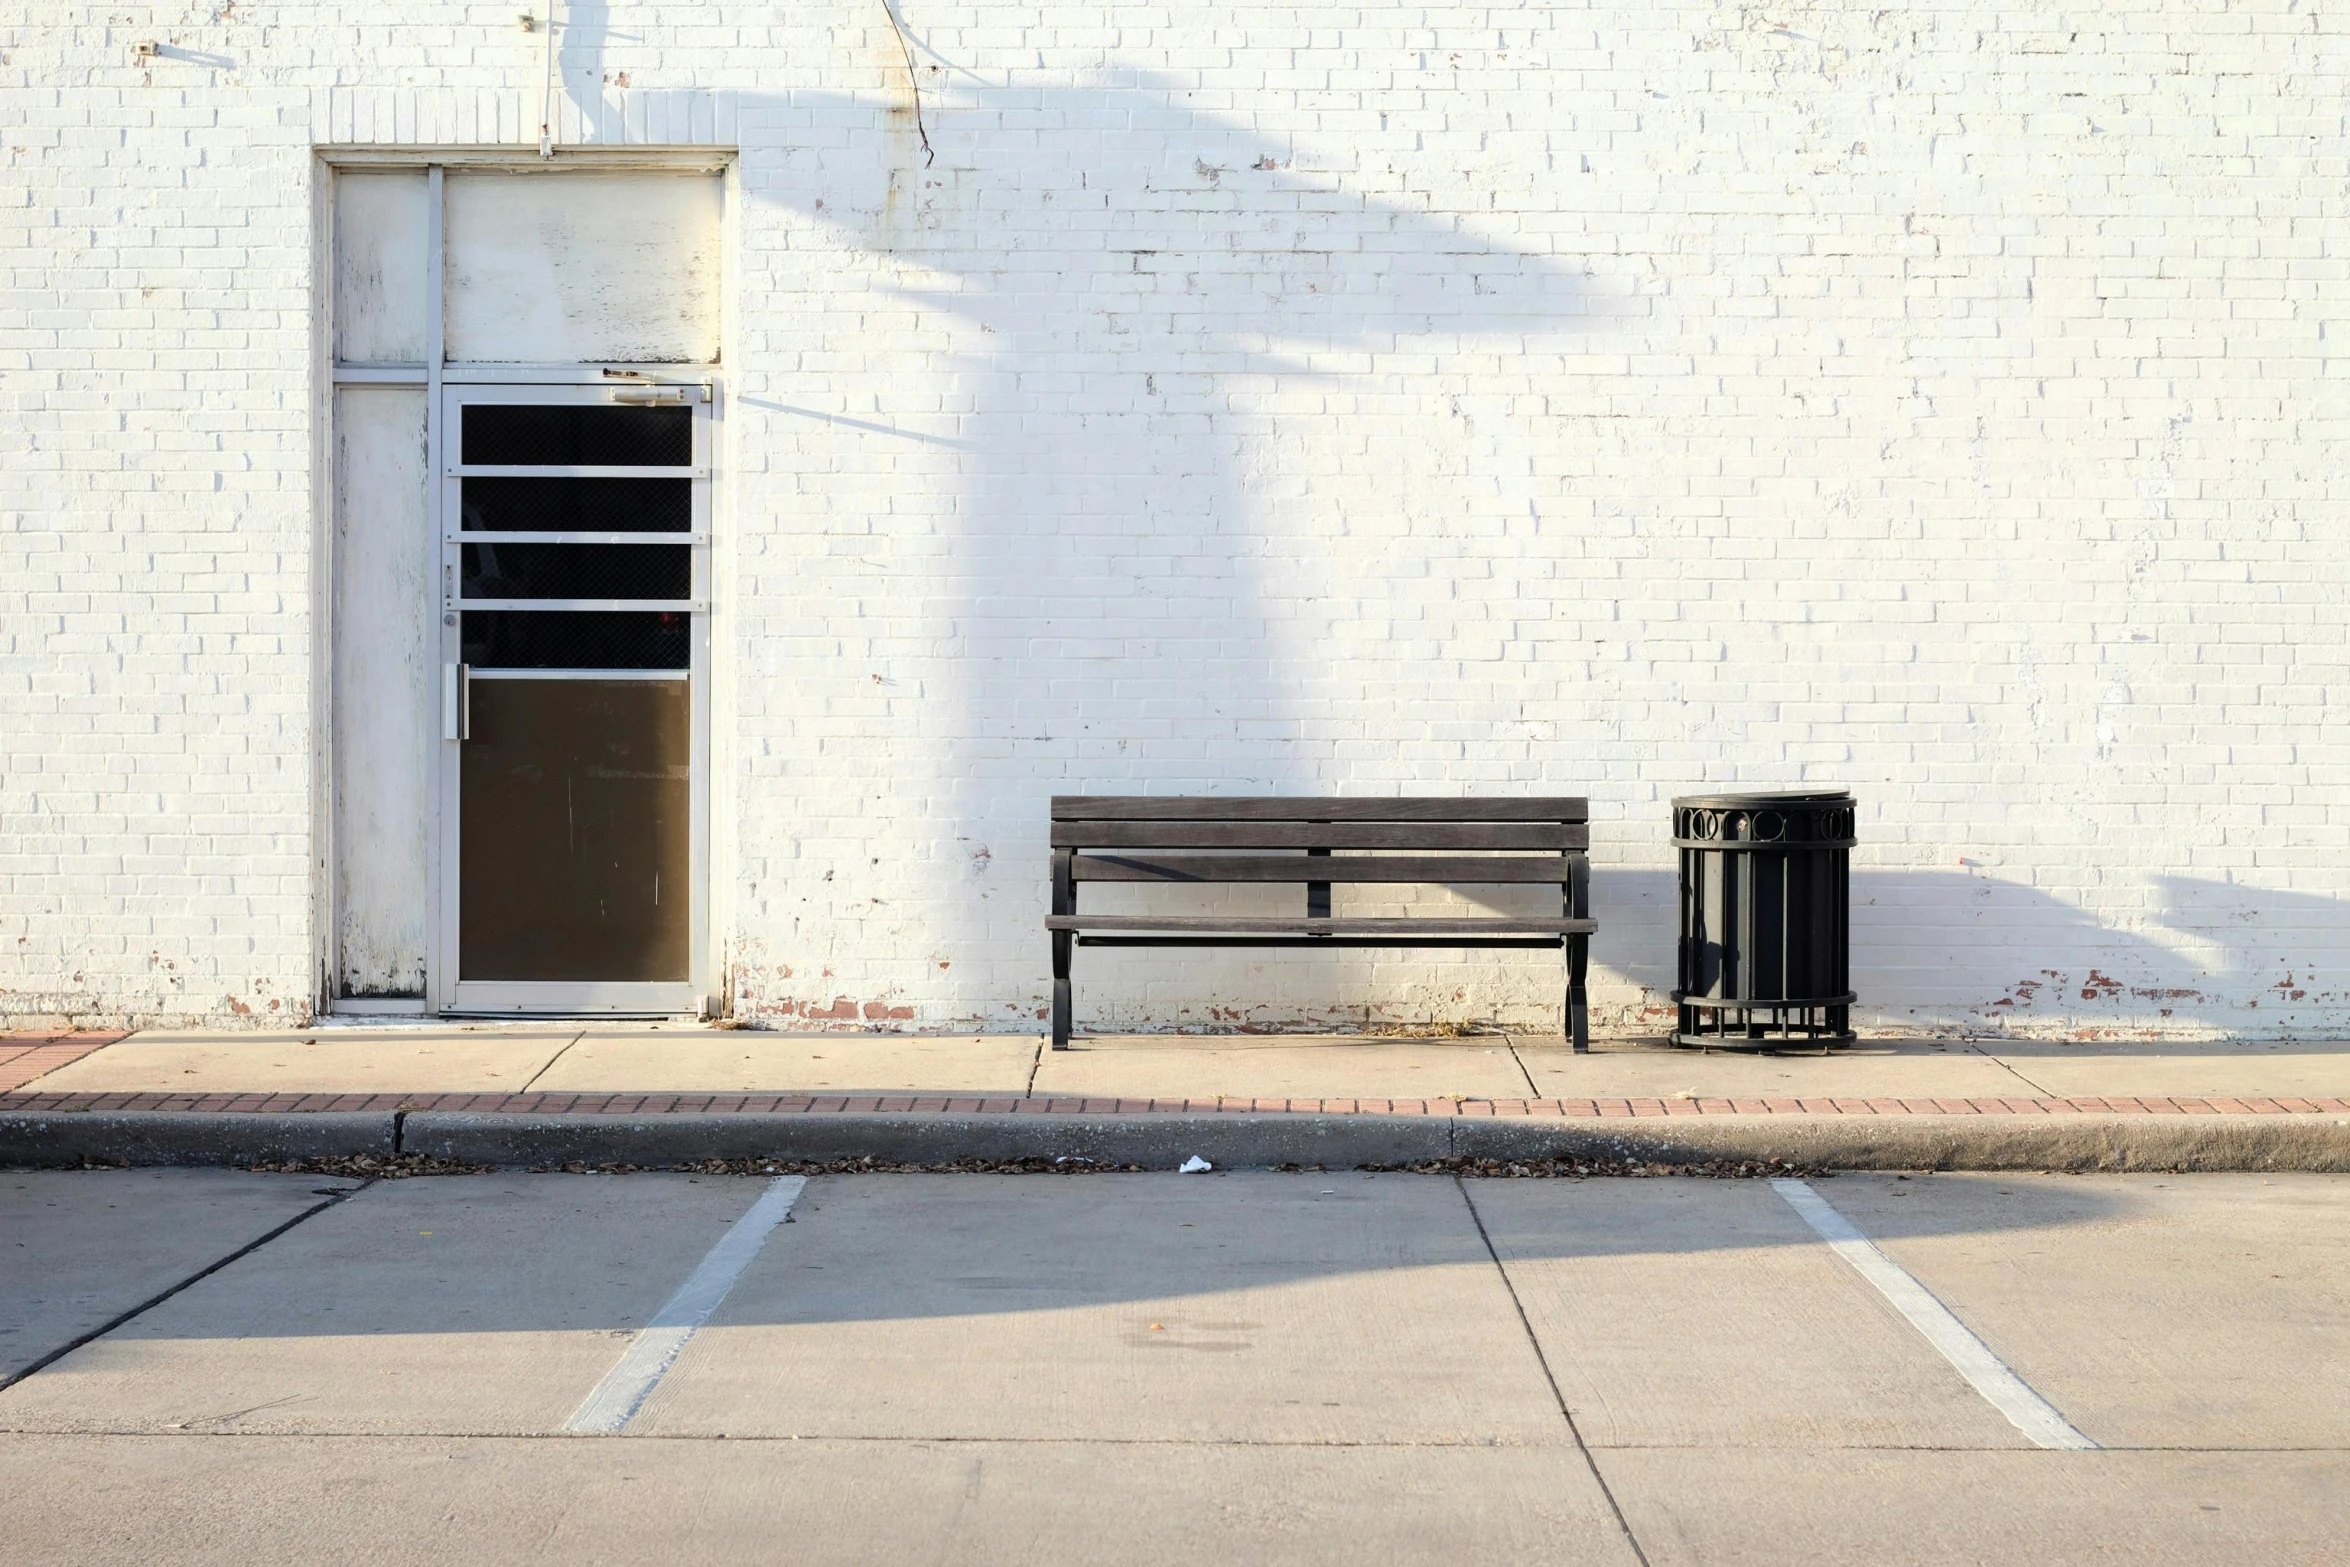 a bench and trash can in front of a white brick building, inspired by Robert Bechtle, postminimalism, heath clifford, ignant, photographic hyperrealism, street view